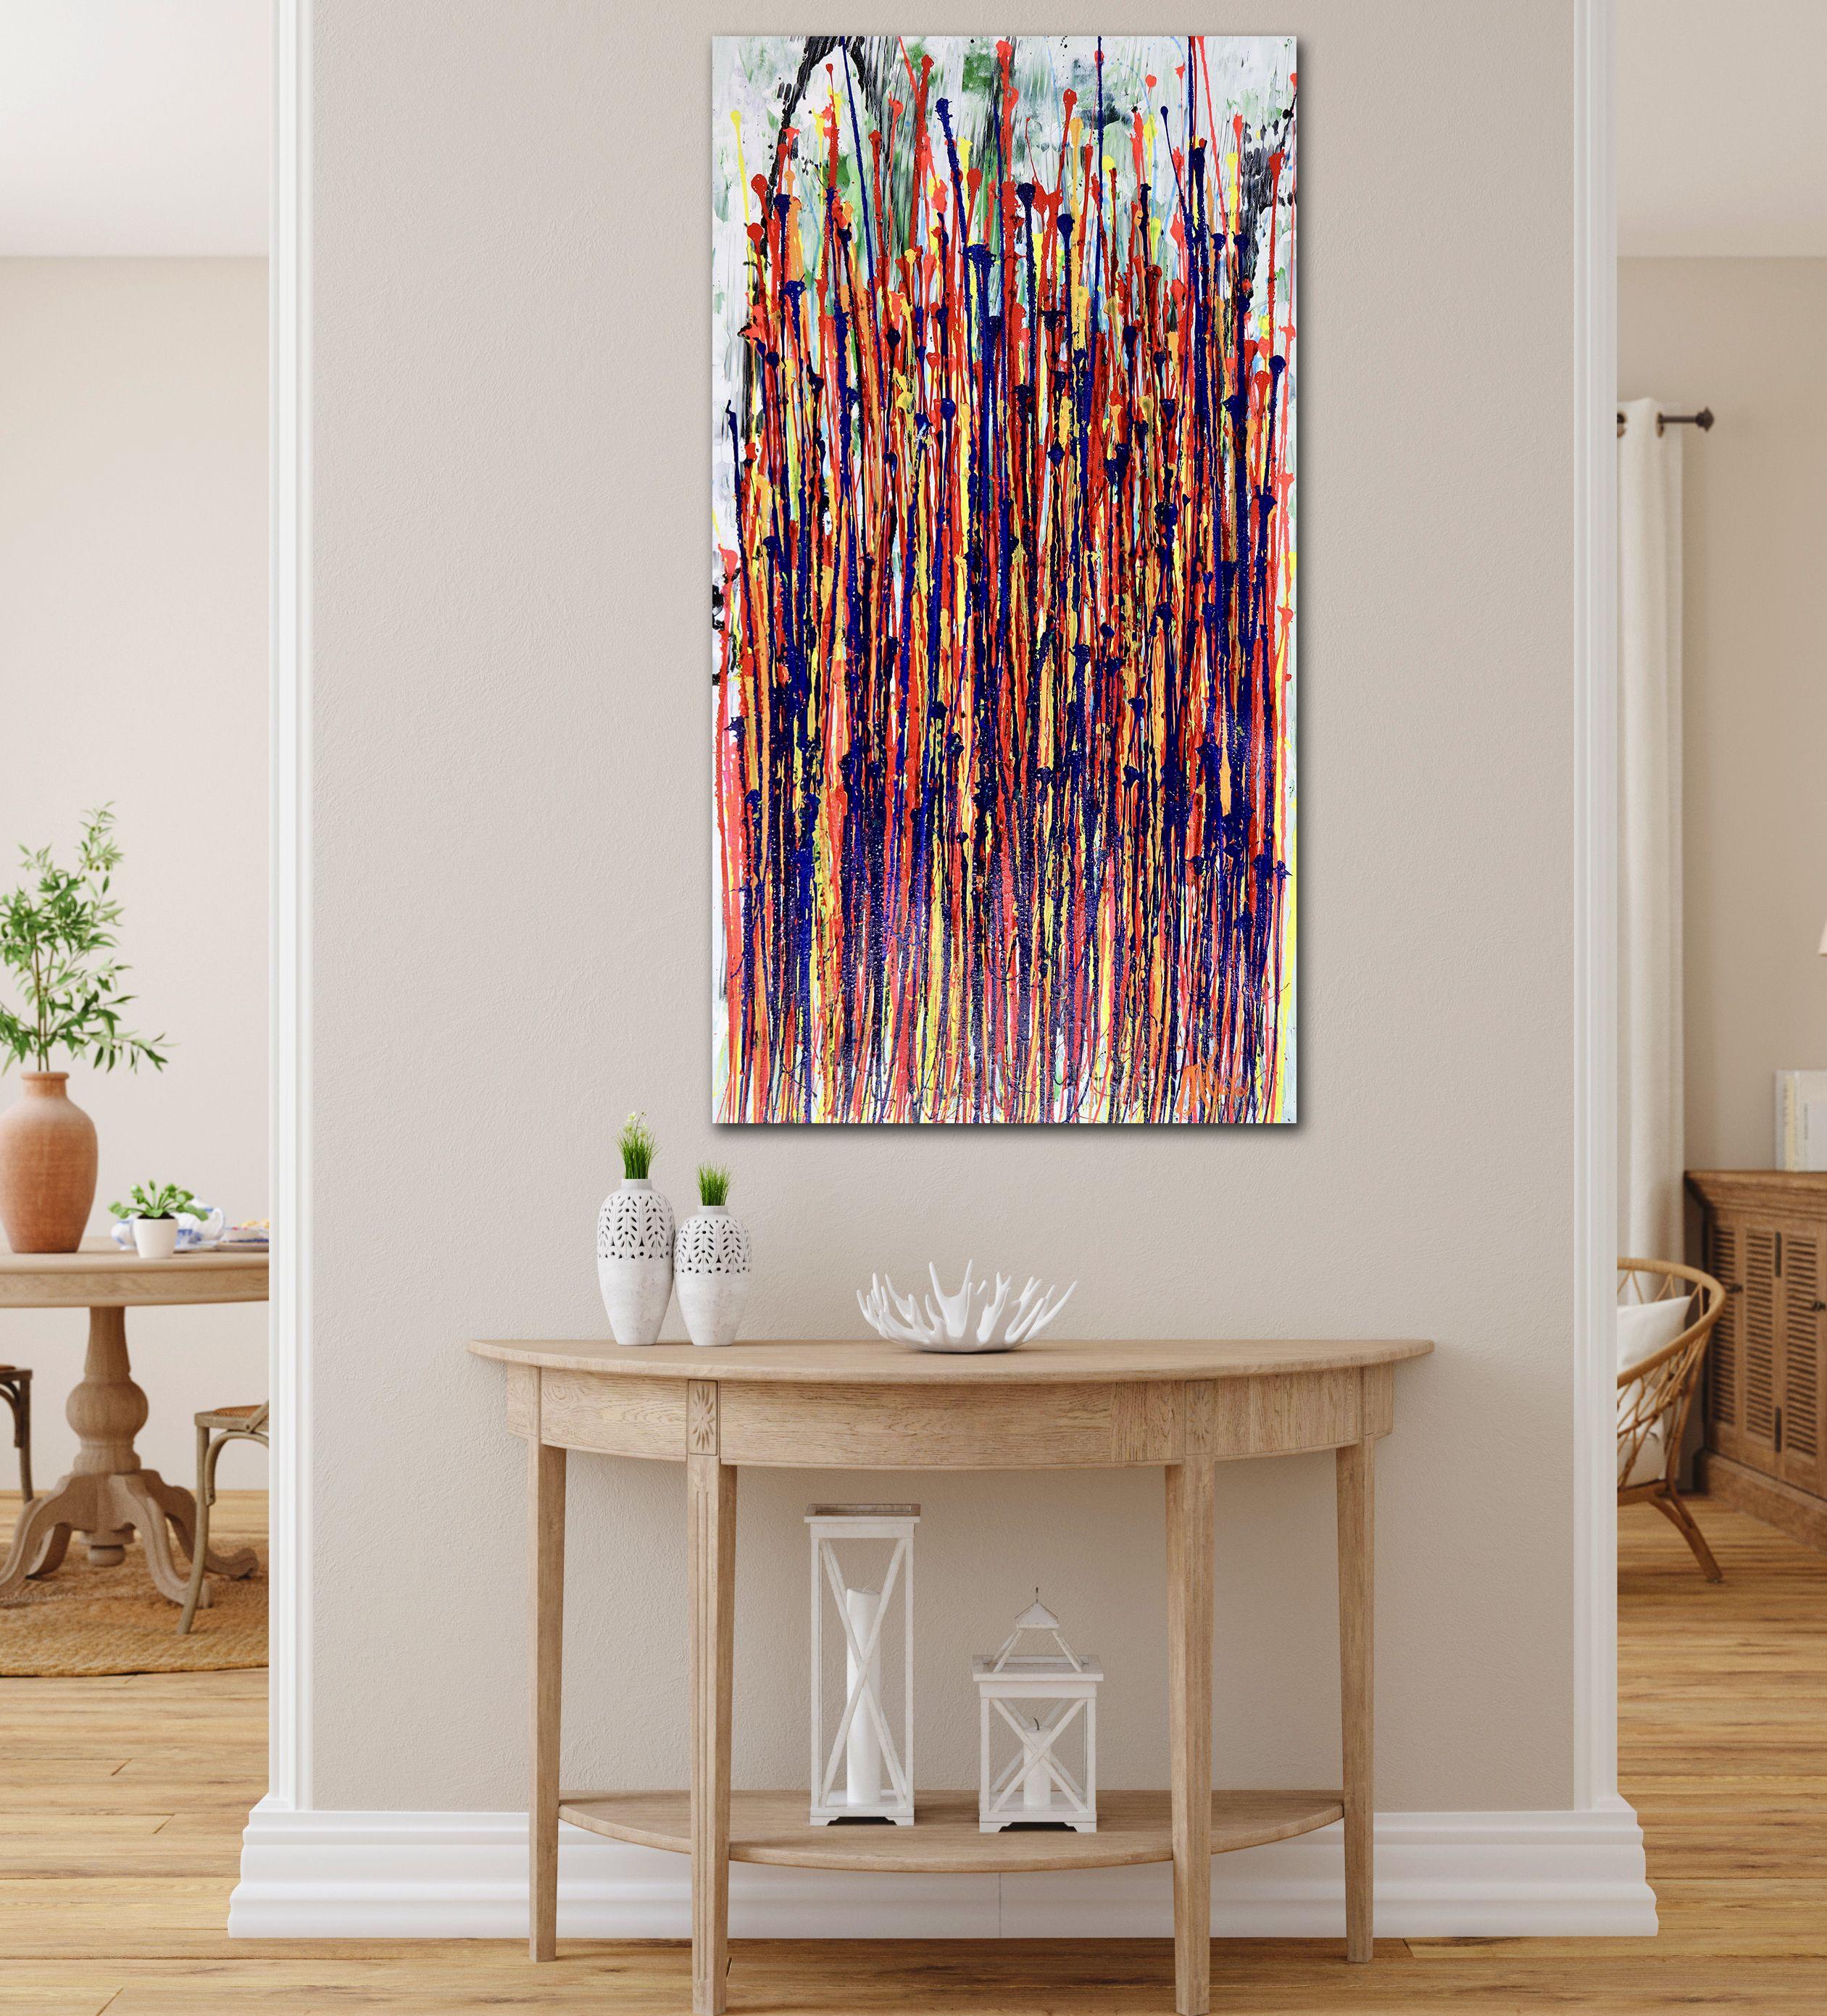 Acrylic on canvas    Energetic, impactful, bold and contemplative inspired by nature abstract. Rich vibrant colors over white and green. Many shades of blue, peach, purple, red, pink and yellow drizzles. This artwork is full of luminance. Signed in